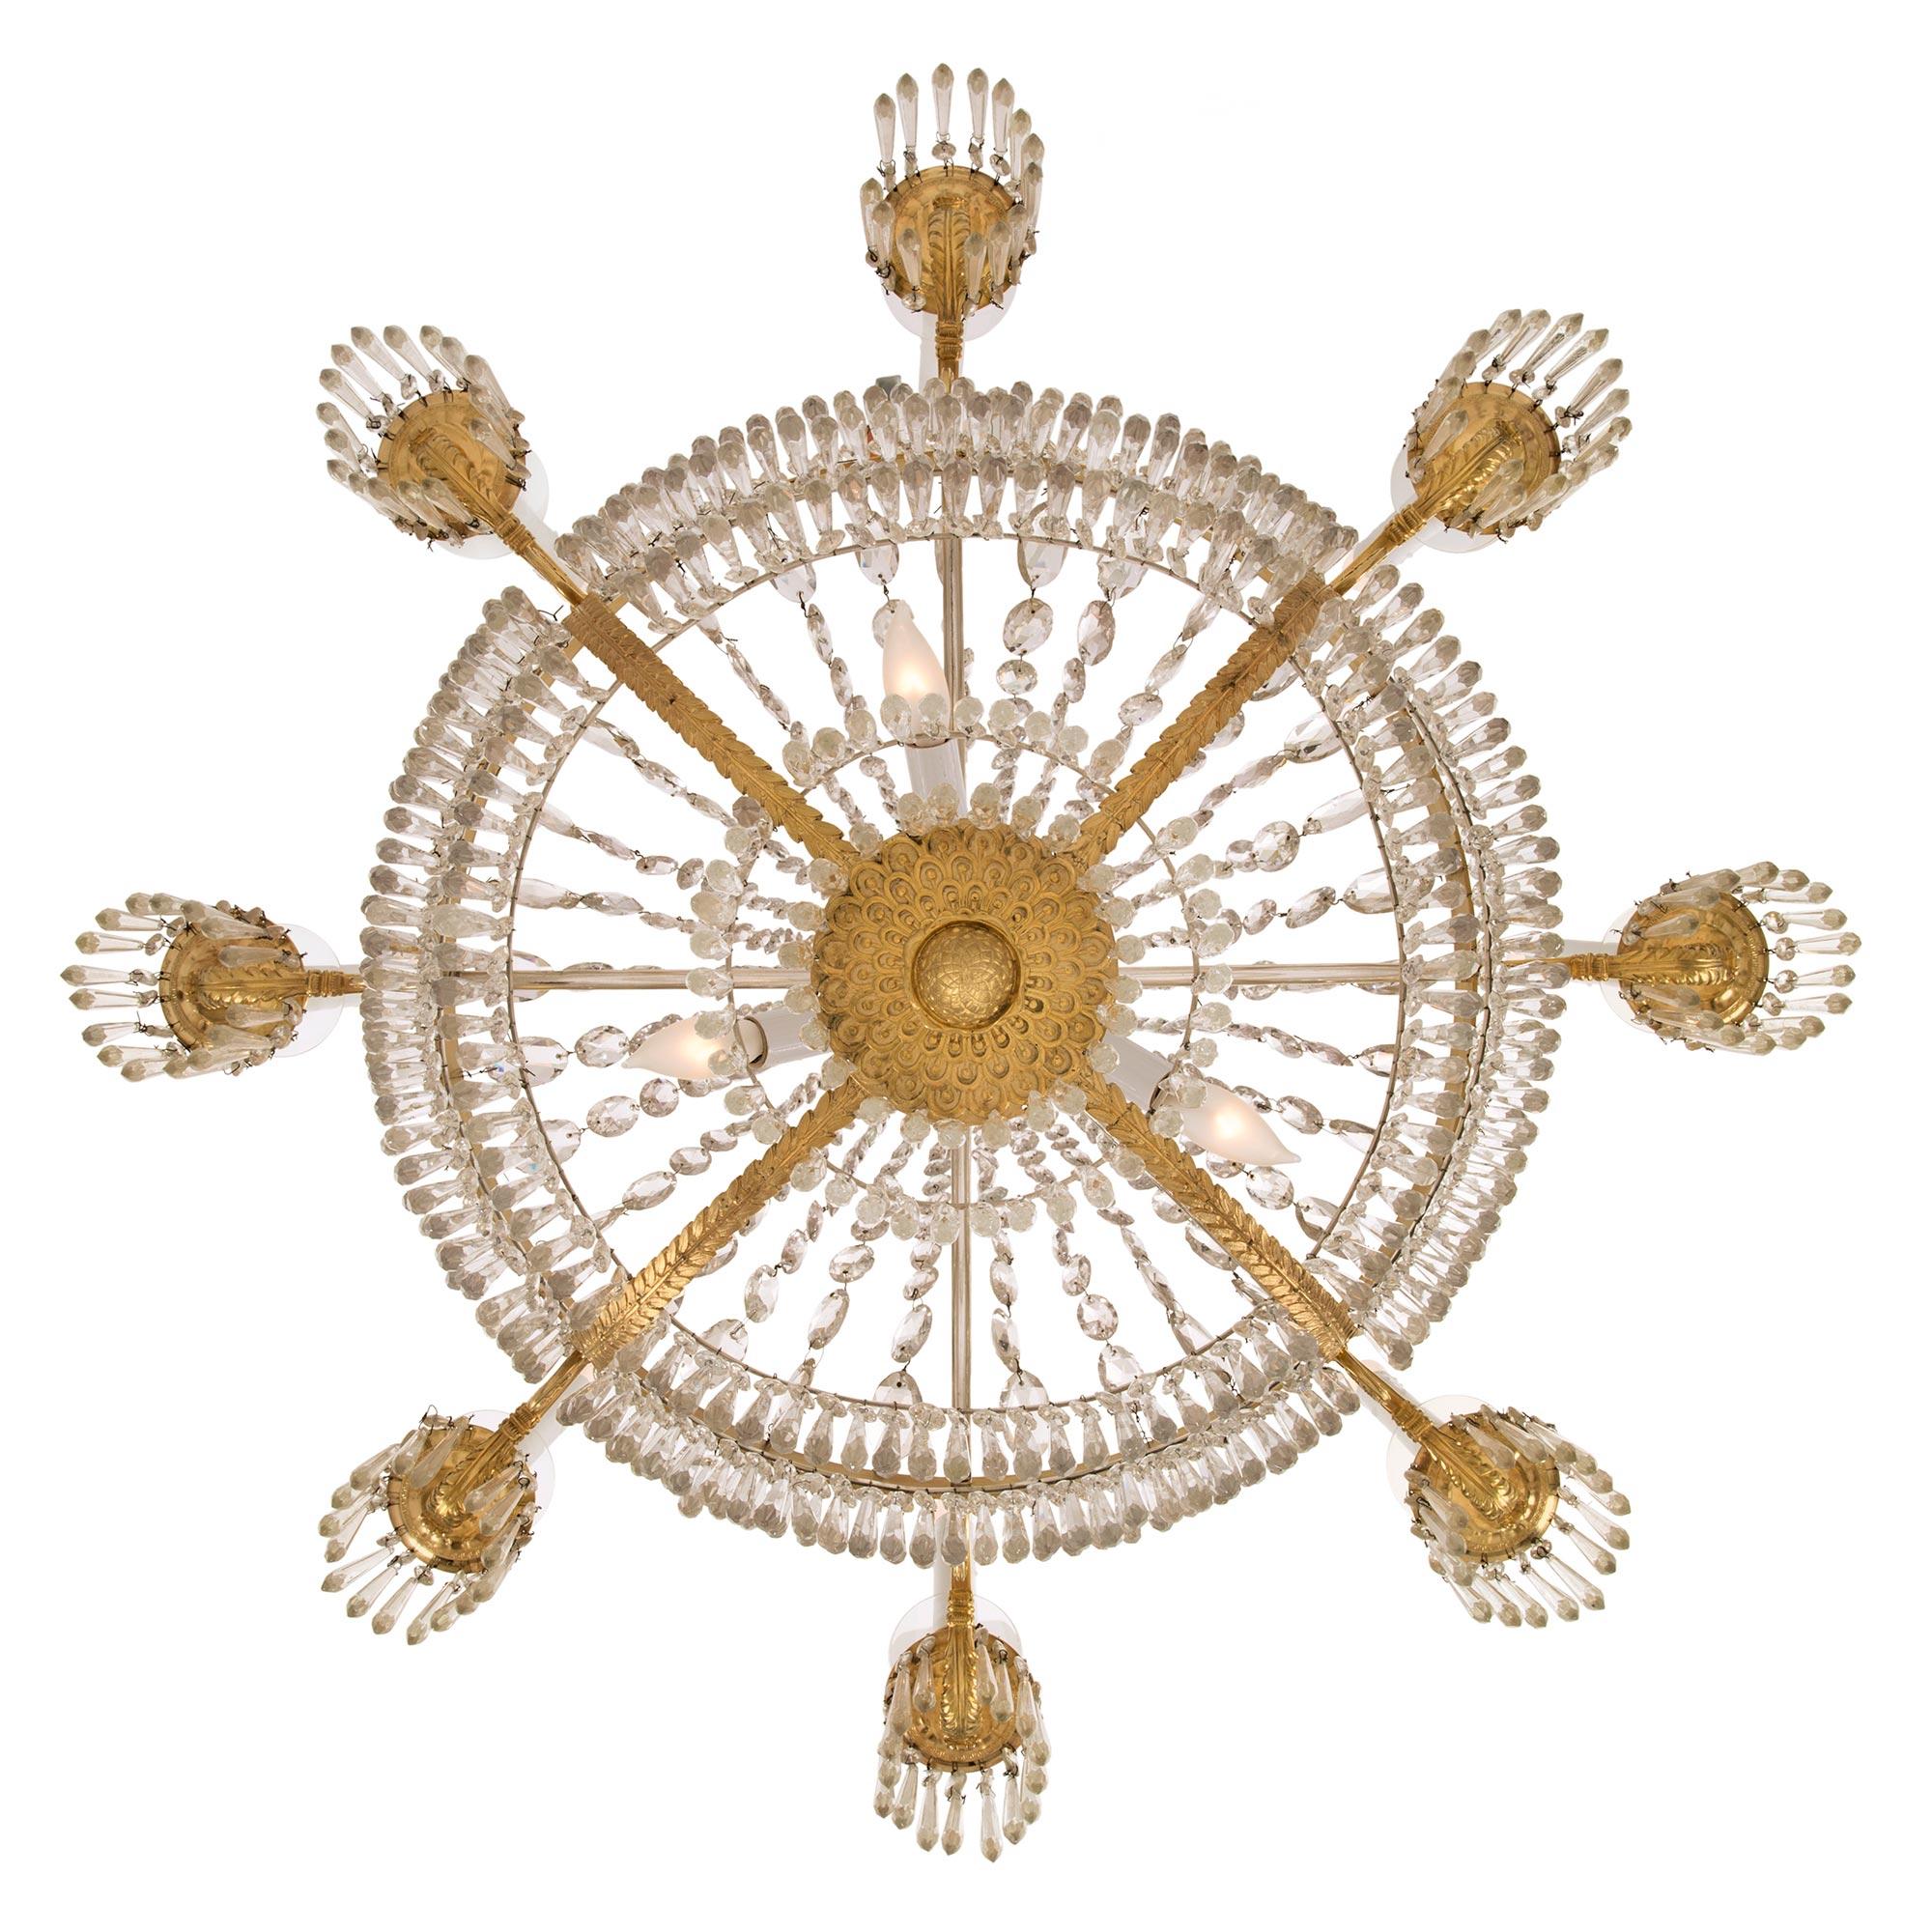 French 19th Century Neoclassical Style Ormolu and Baccarat Crystal Chandelier For Sale 5